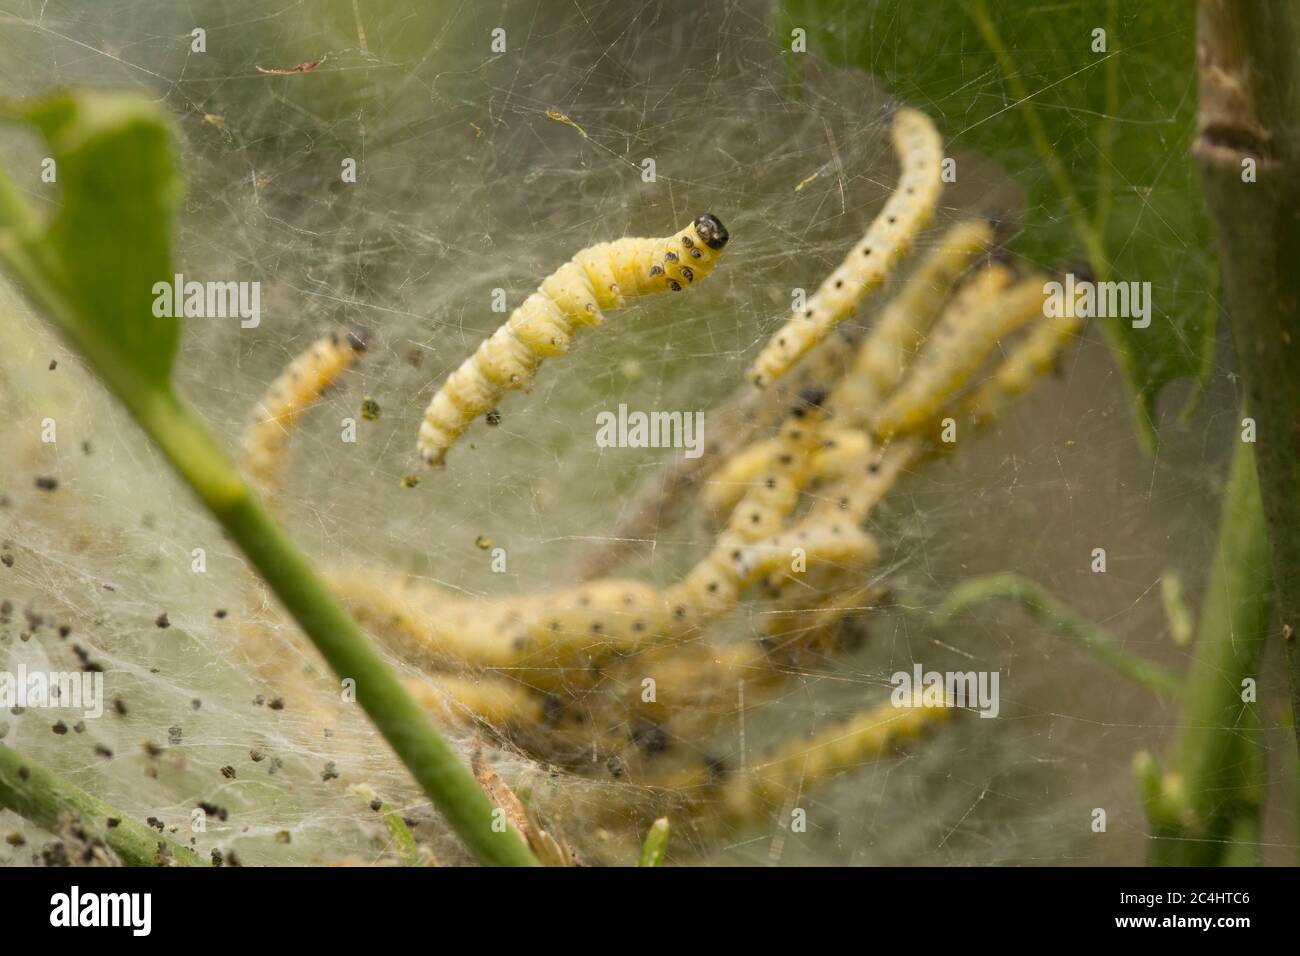 Caterpillars, or larvae, of the Spindle Ermine moth, Yponomeuta cagnagella, inside their silken web. North Dorset England UK GB Stock Photo